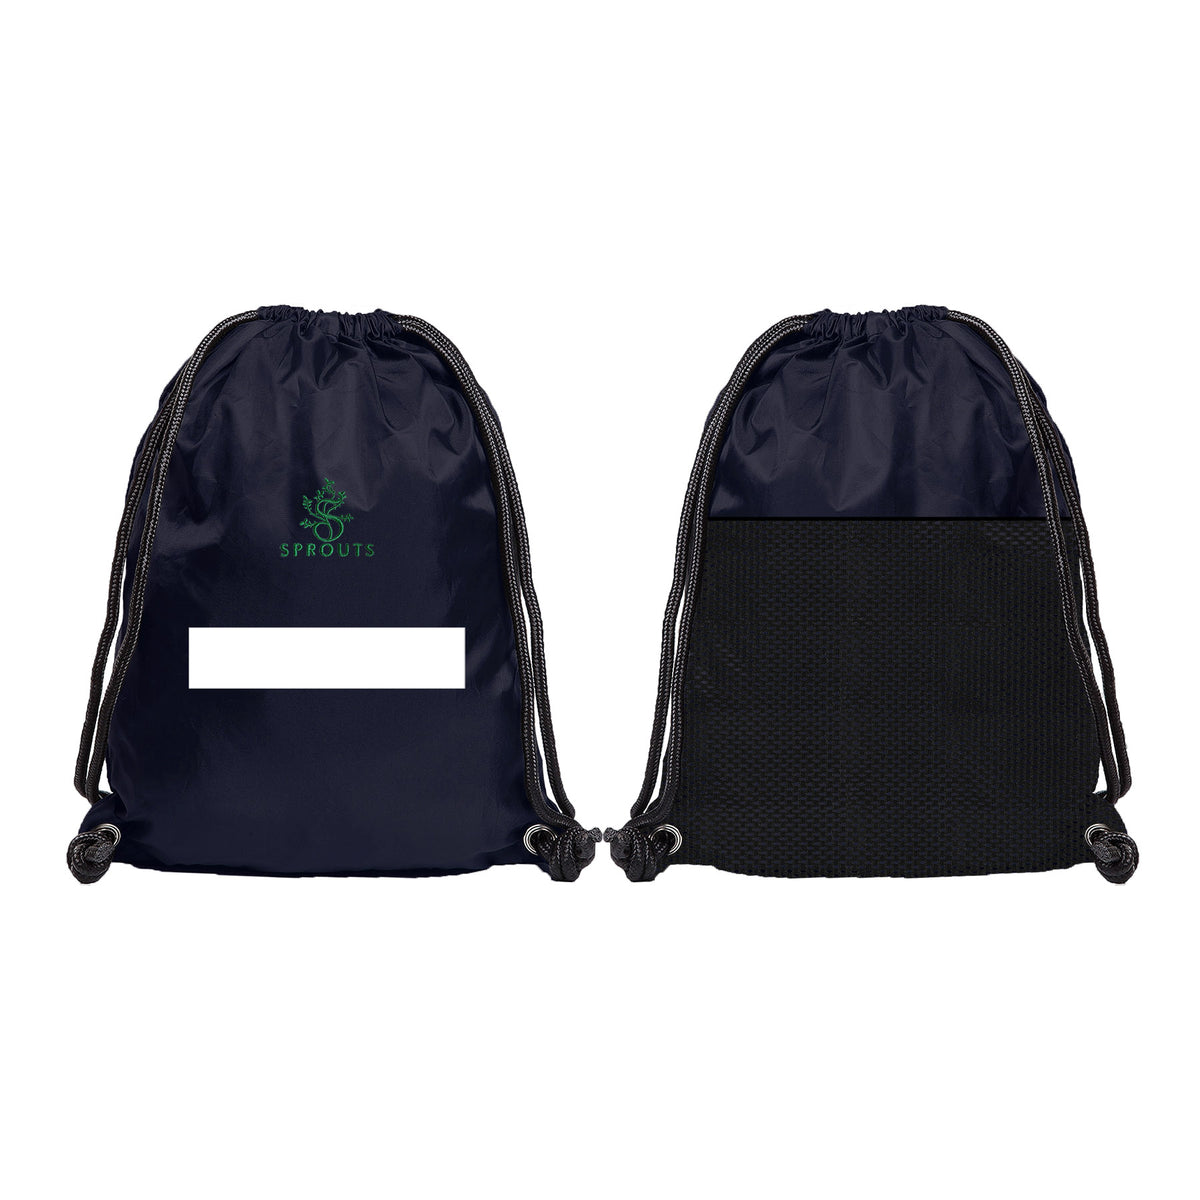 SPROUTS ACADEMY DRAWSTRING BAG